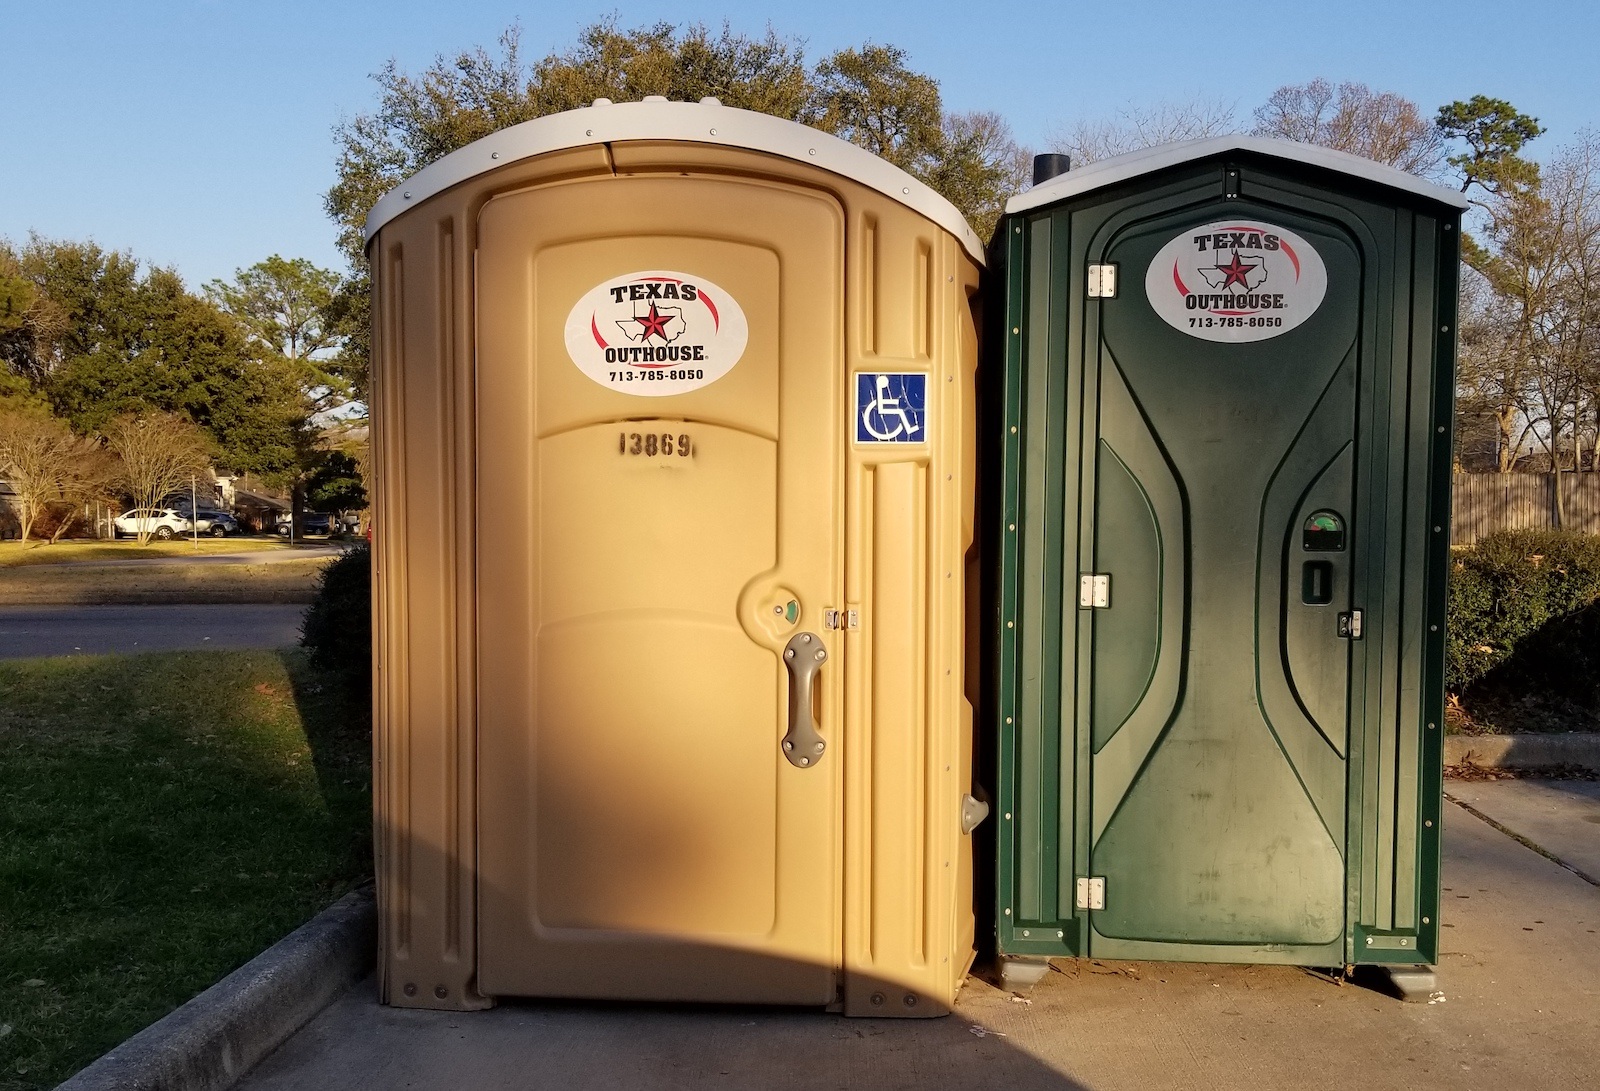 A handicap portable toilet is available to serve all guests at an outdoor event